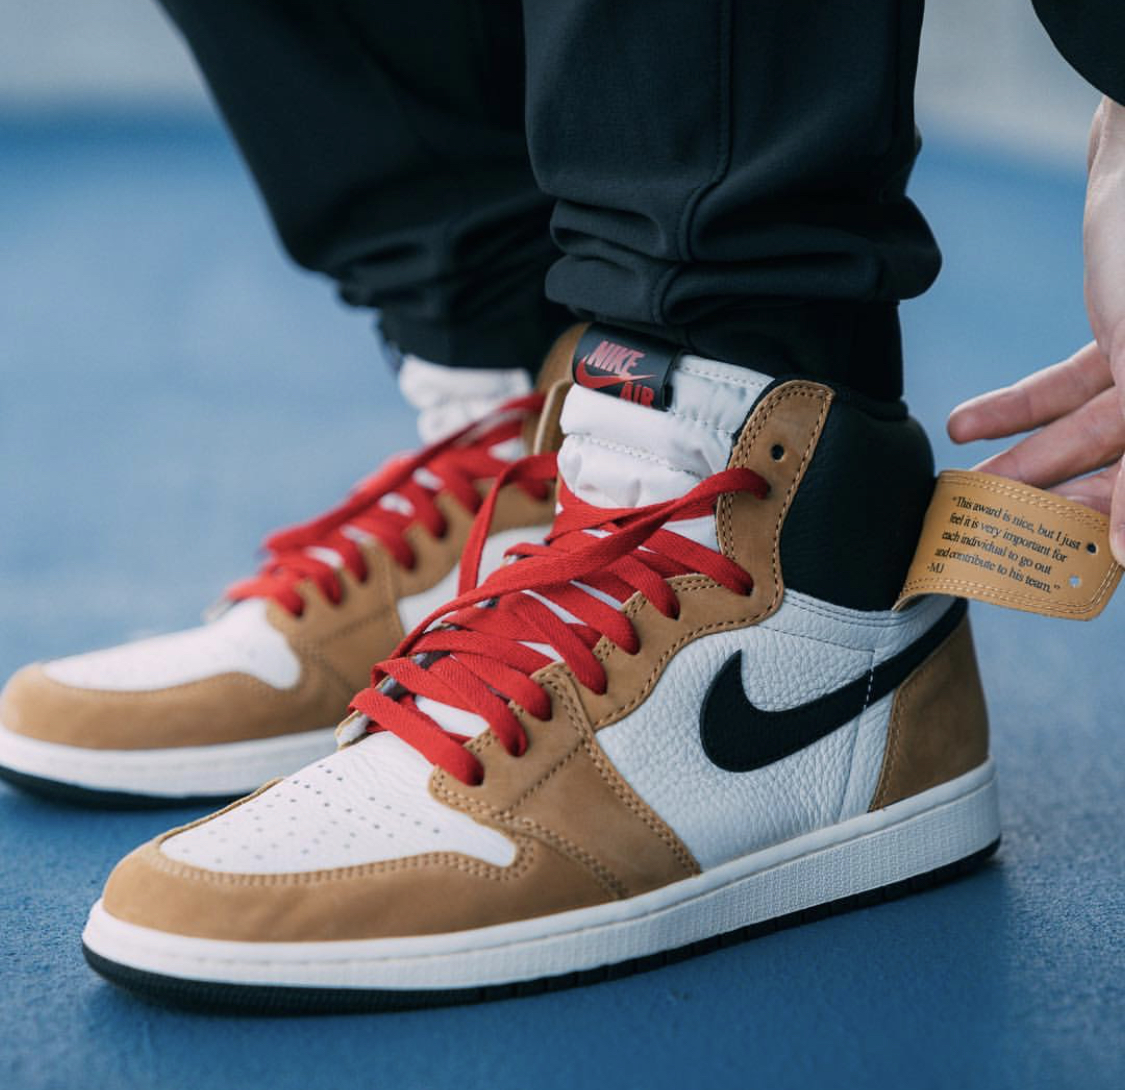 Now Available: Air Jordan 1 Retro "Rookie of the Year" — Sneaker Shouts